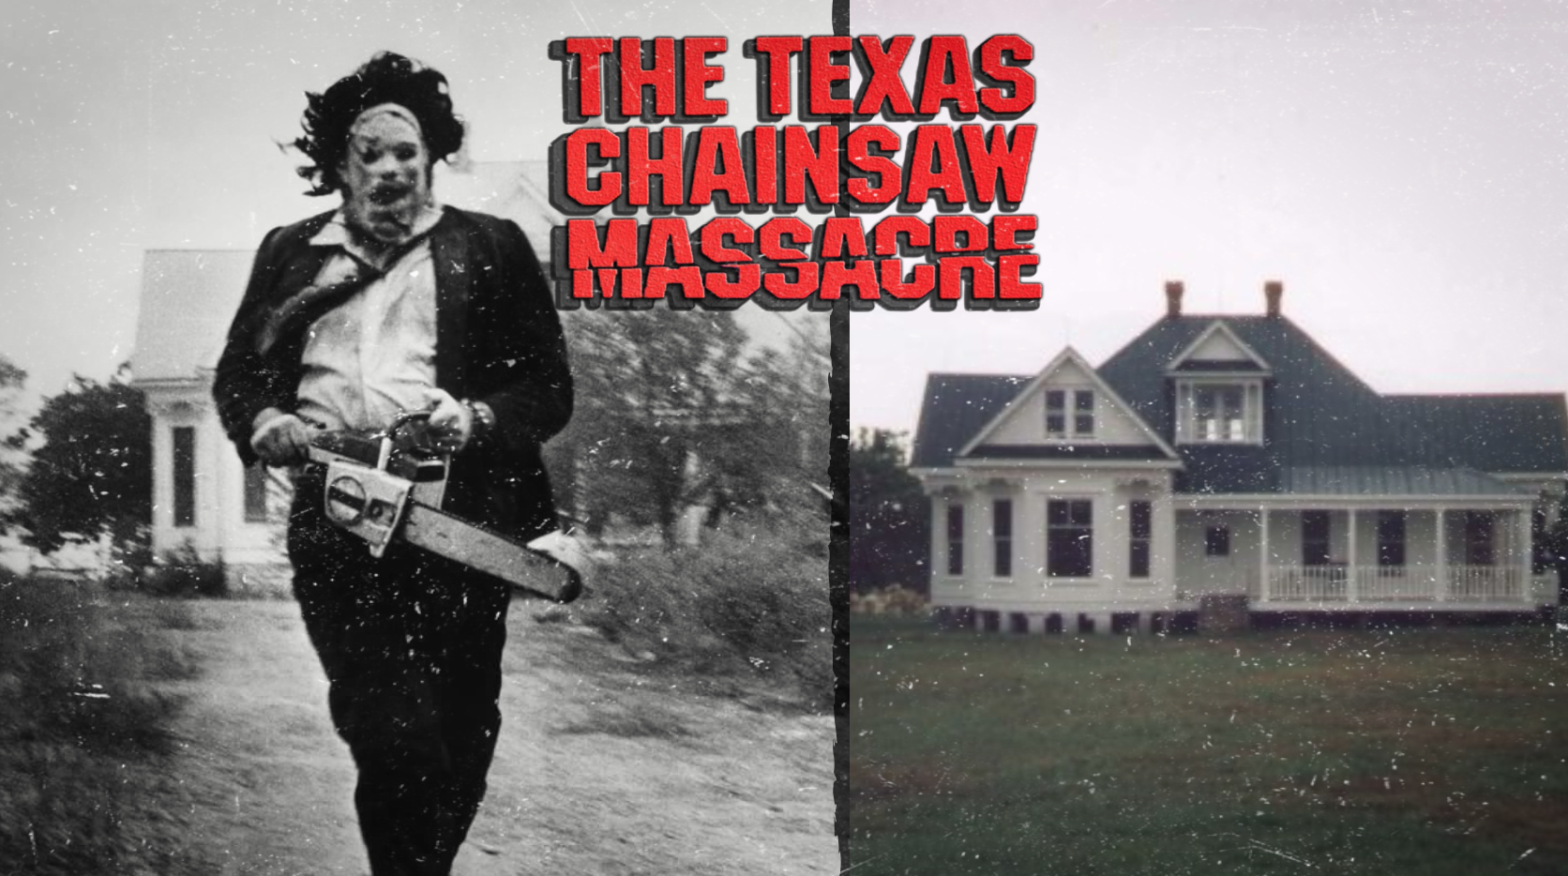 During this spring, you could spend a night at the original house from 1974 film “The Texas Chain Saw Massacre”